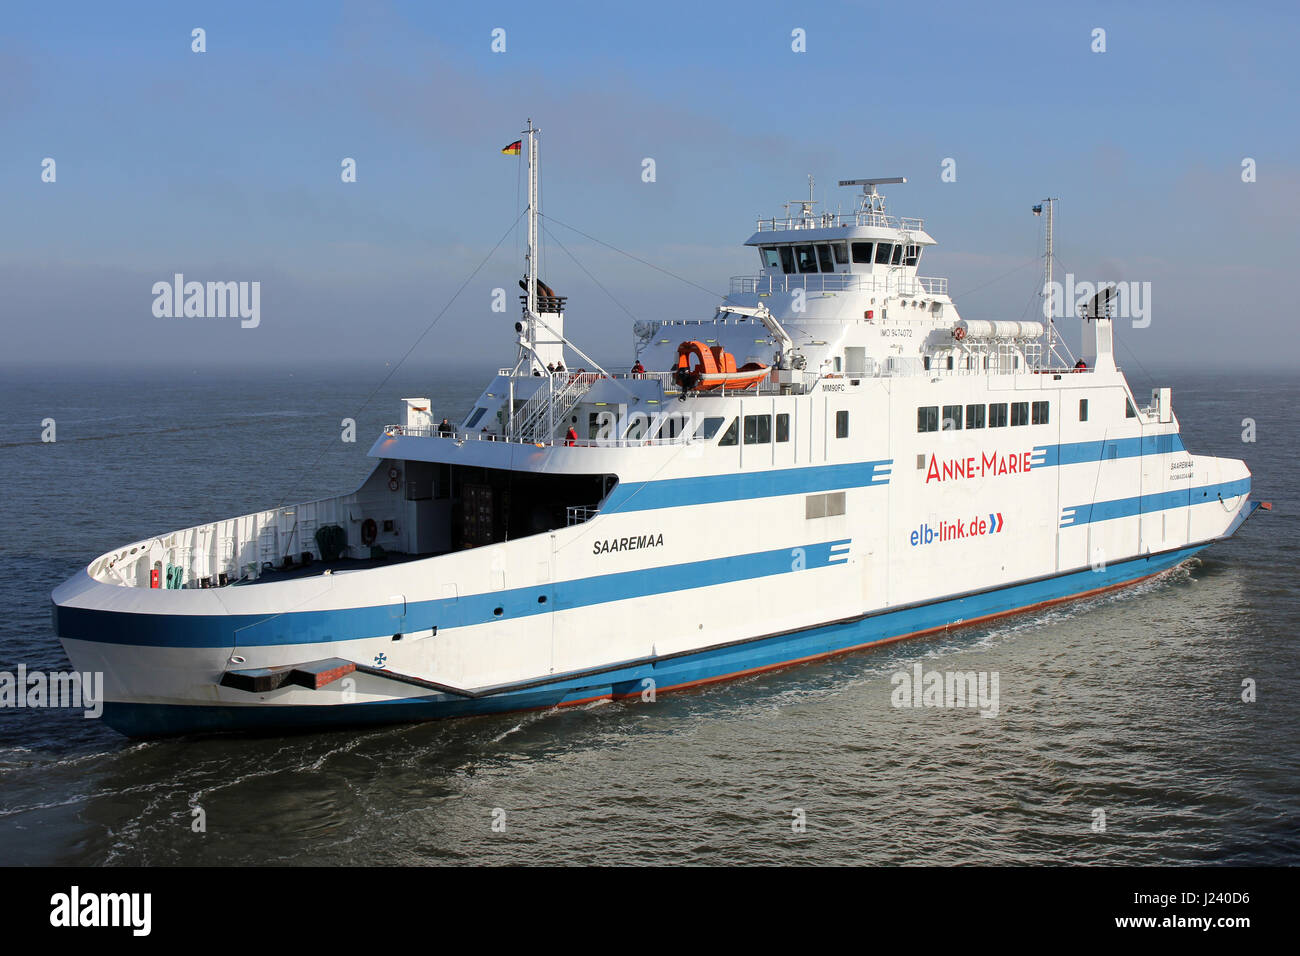 2010 costruito double-ended elb-link ferry ANNE-MARIE in servizio tra Cuxhaven e Brunsbuttel Foto Stock